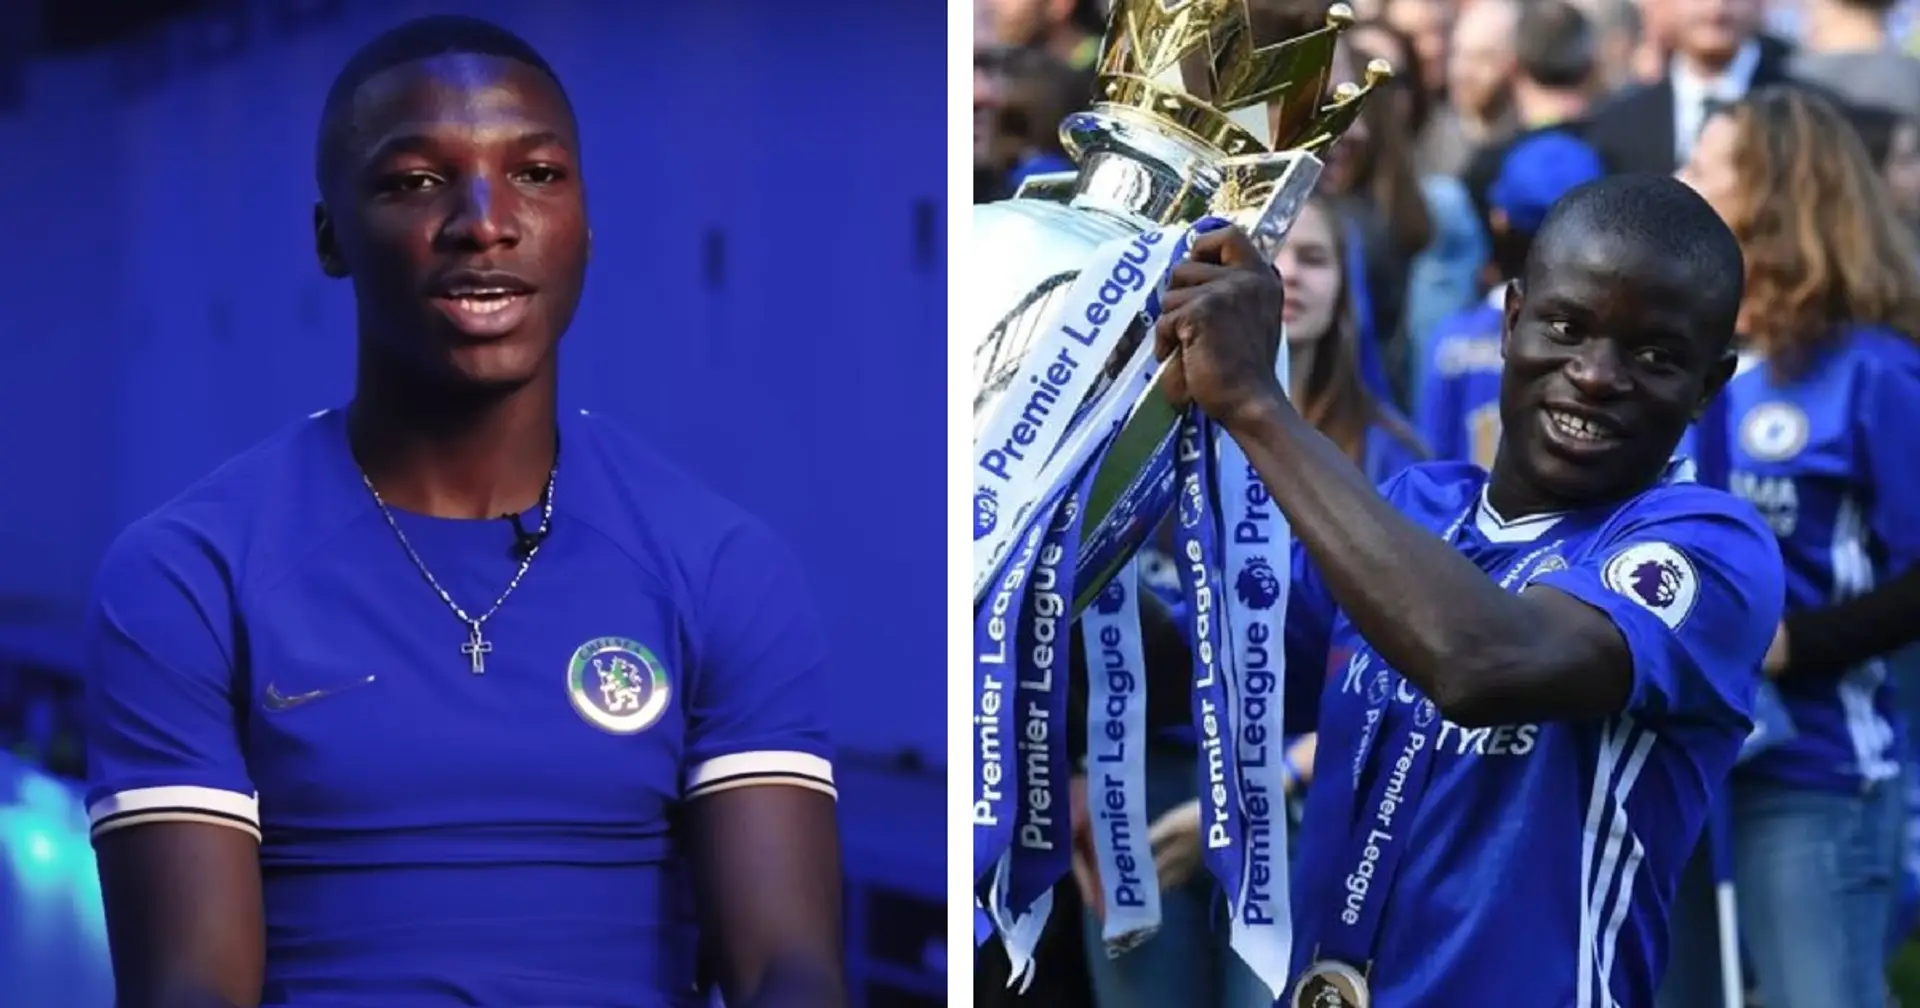 Caicedo names Kante and Man United flop as two of his idols in football